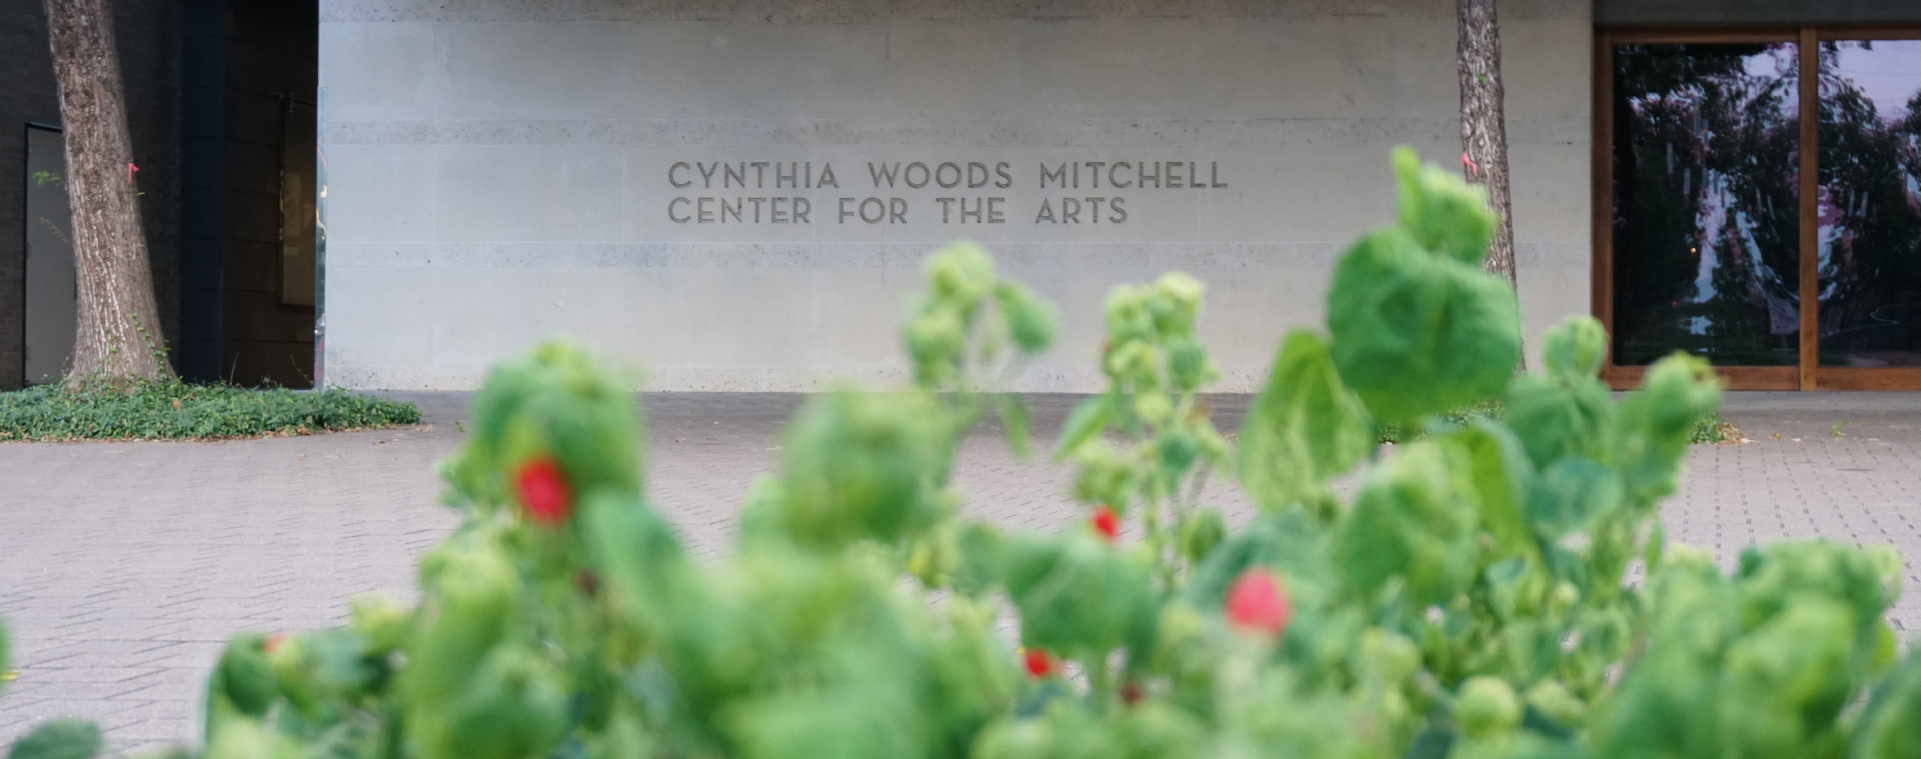 Cream stone building façade in the background with foliage and red flowers in the foreground. Text carved into the façade reads “Cynthia Woods Mitchell Center for the Arts."